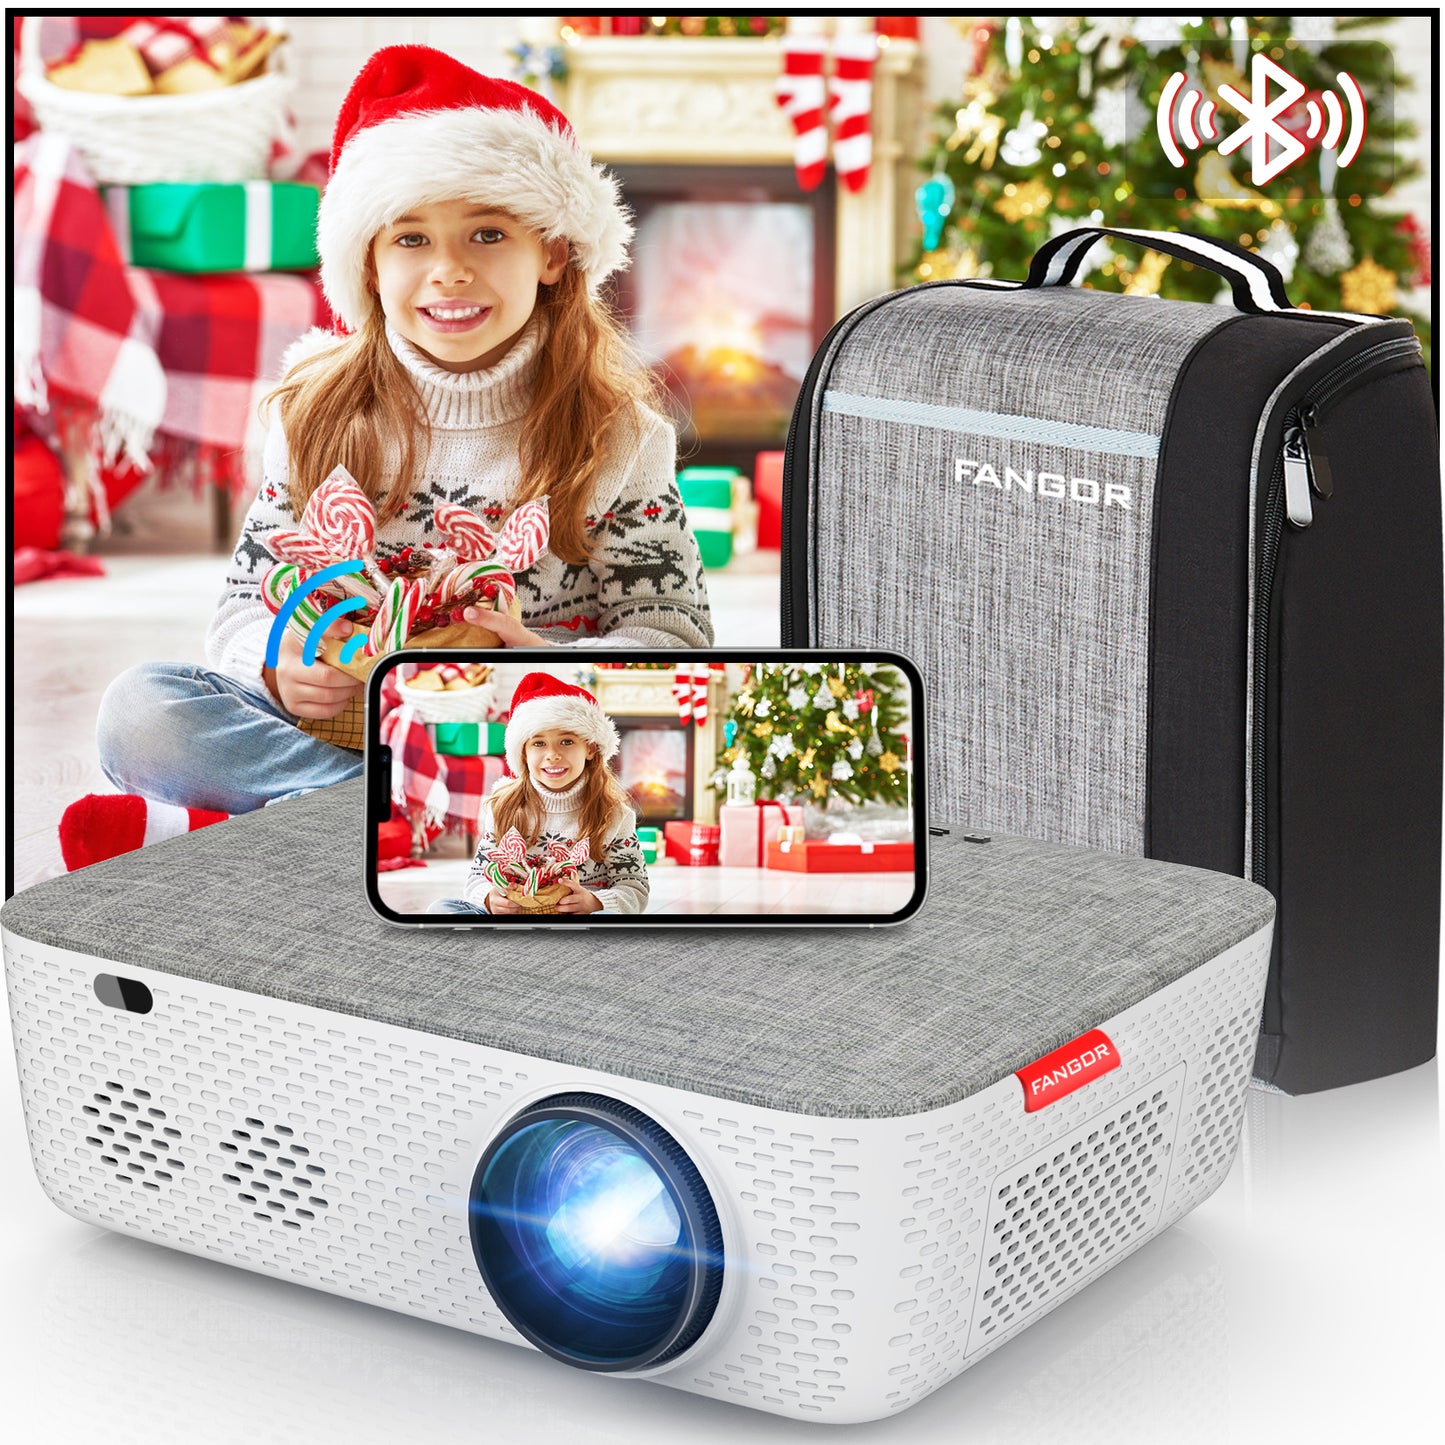 Fangor Projector with 5G WiFi and Bluetooth, 340ANSI Native 1080P Full HD Video Projector, Outdoor Movie Projector Support 4K ,Digital Keystone/50% Zoom,Compatible with HDMI, USB, iOS/Android Phone